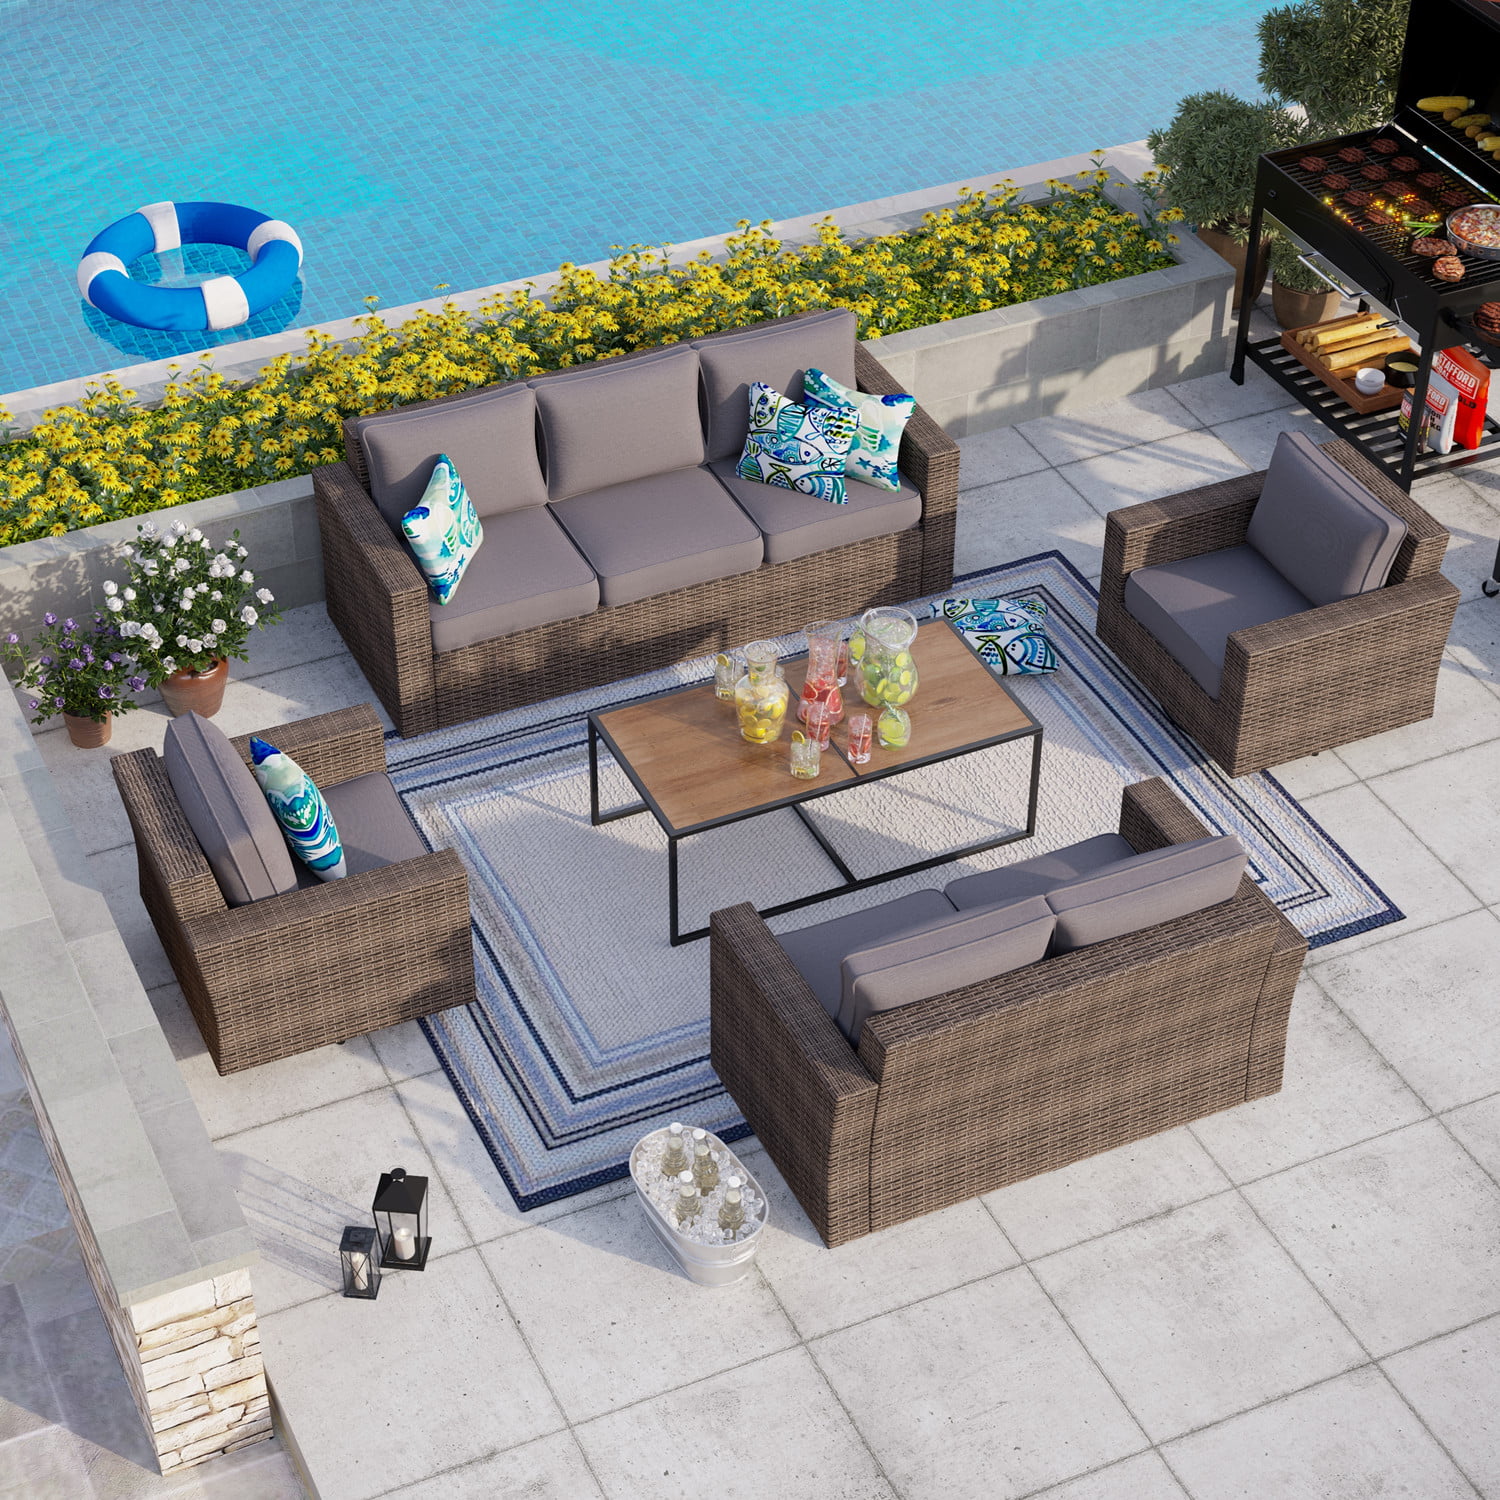 romatlink Patio Sectional Furniture 4 Piece Outdoor Conversation Weather Wicker Sofa Set with Storage Table Beige-4pc 